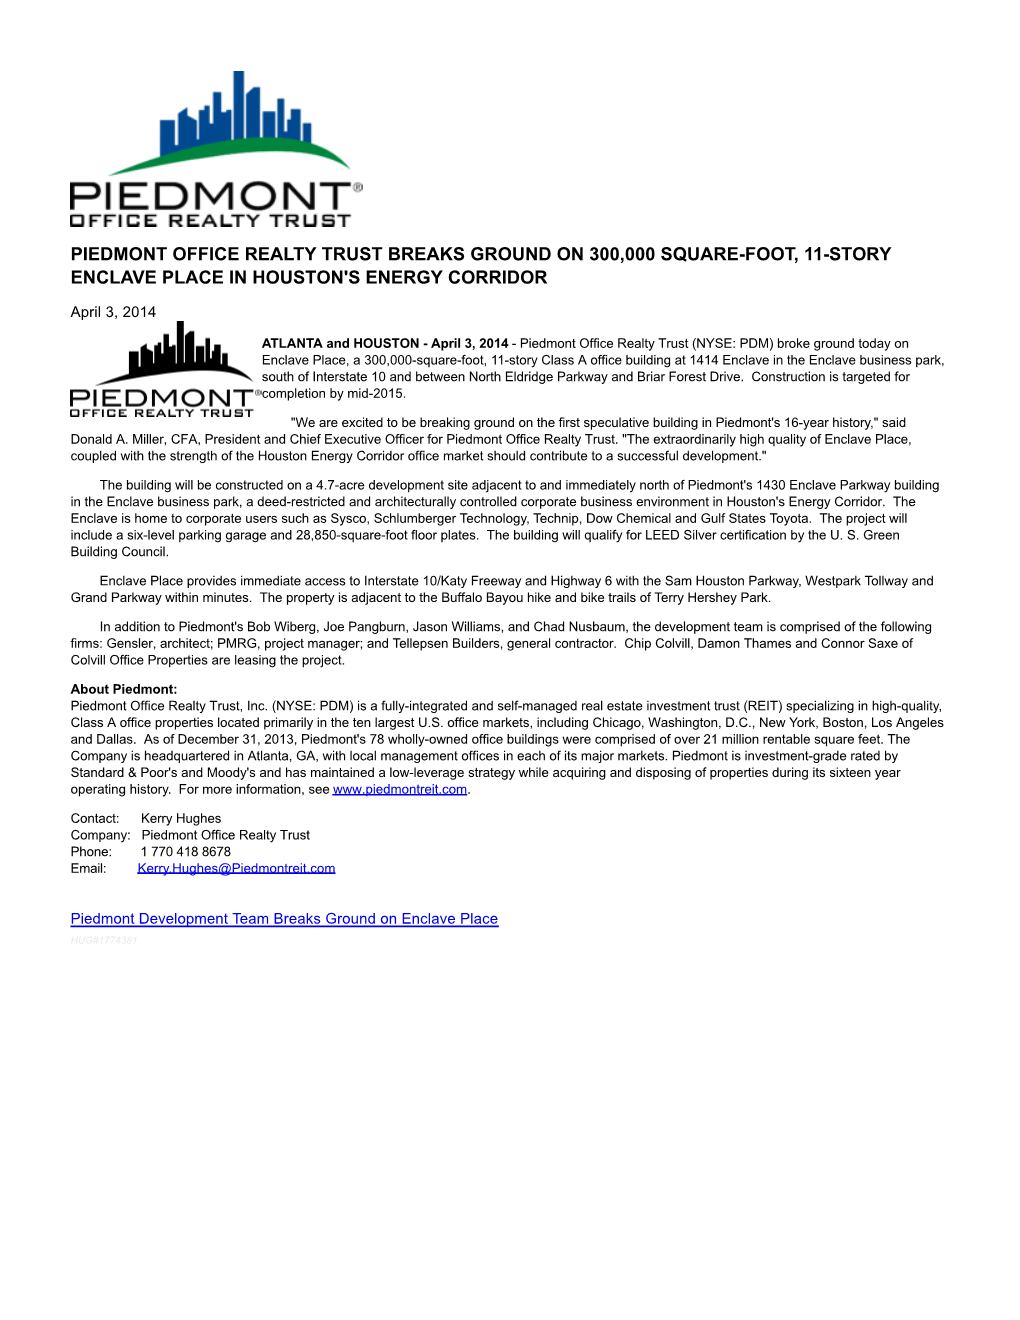 Piedmont Office Realty Trust Breaks Ground on 300,000 Square-Foot, 11-Story Enclave Place in Houston's Energy Corridor